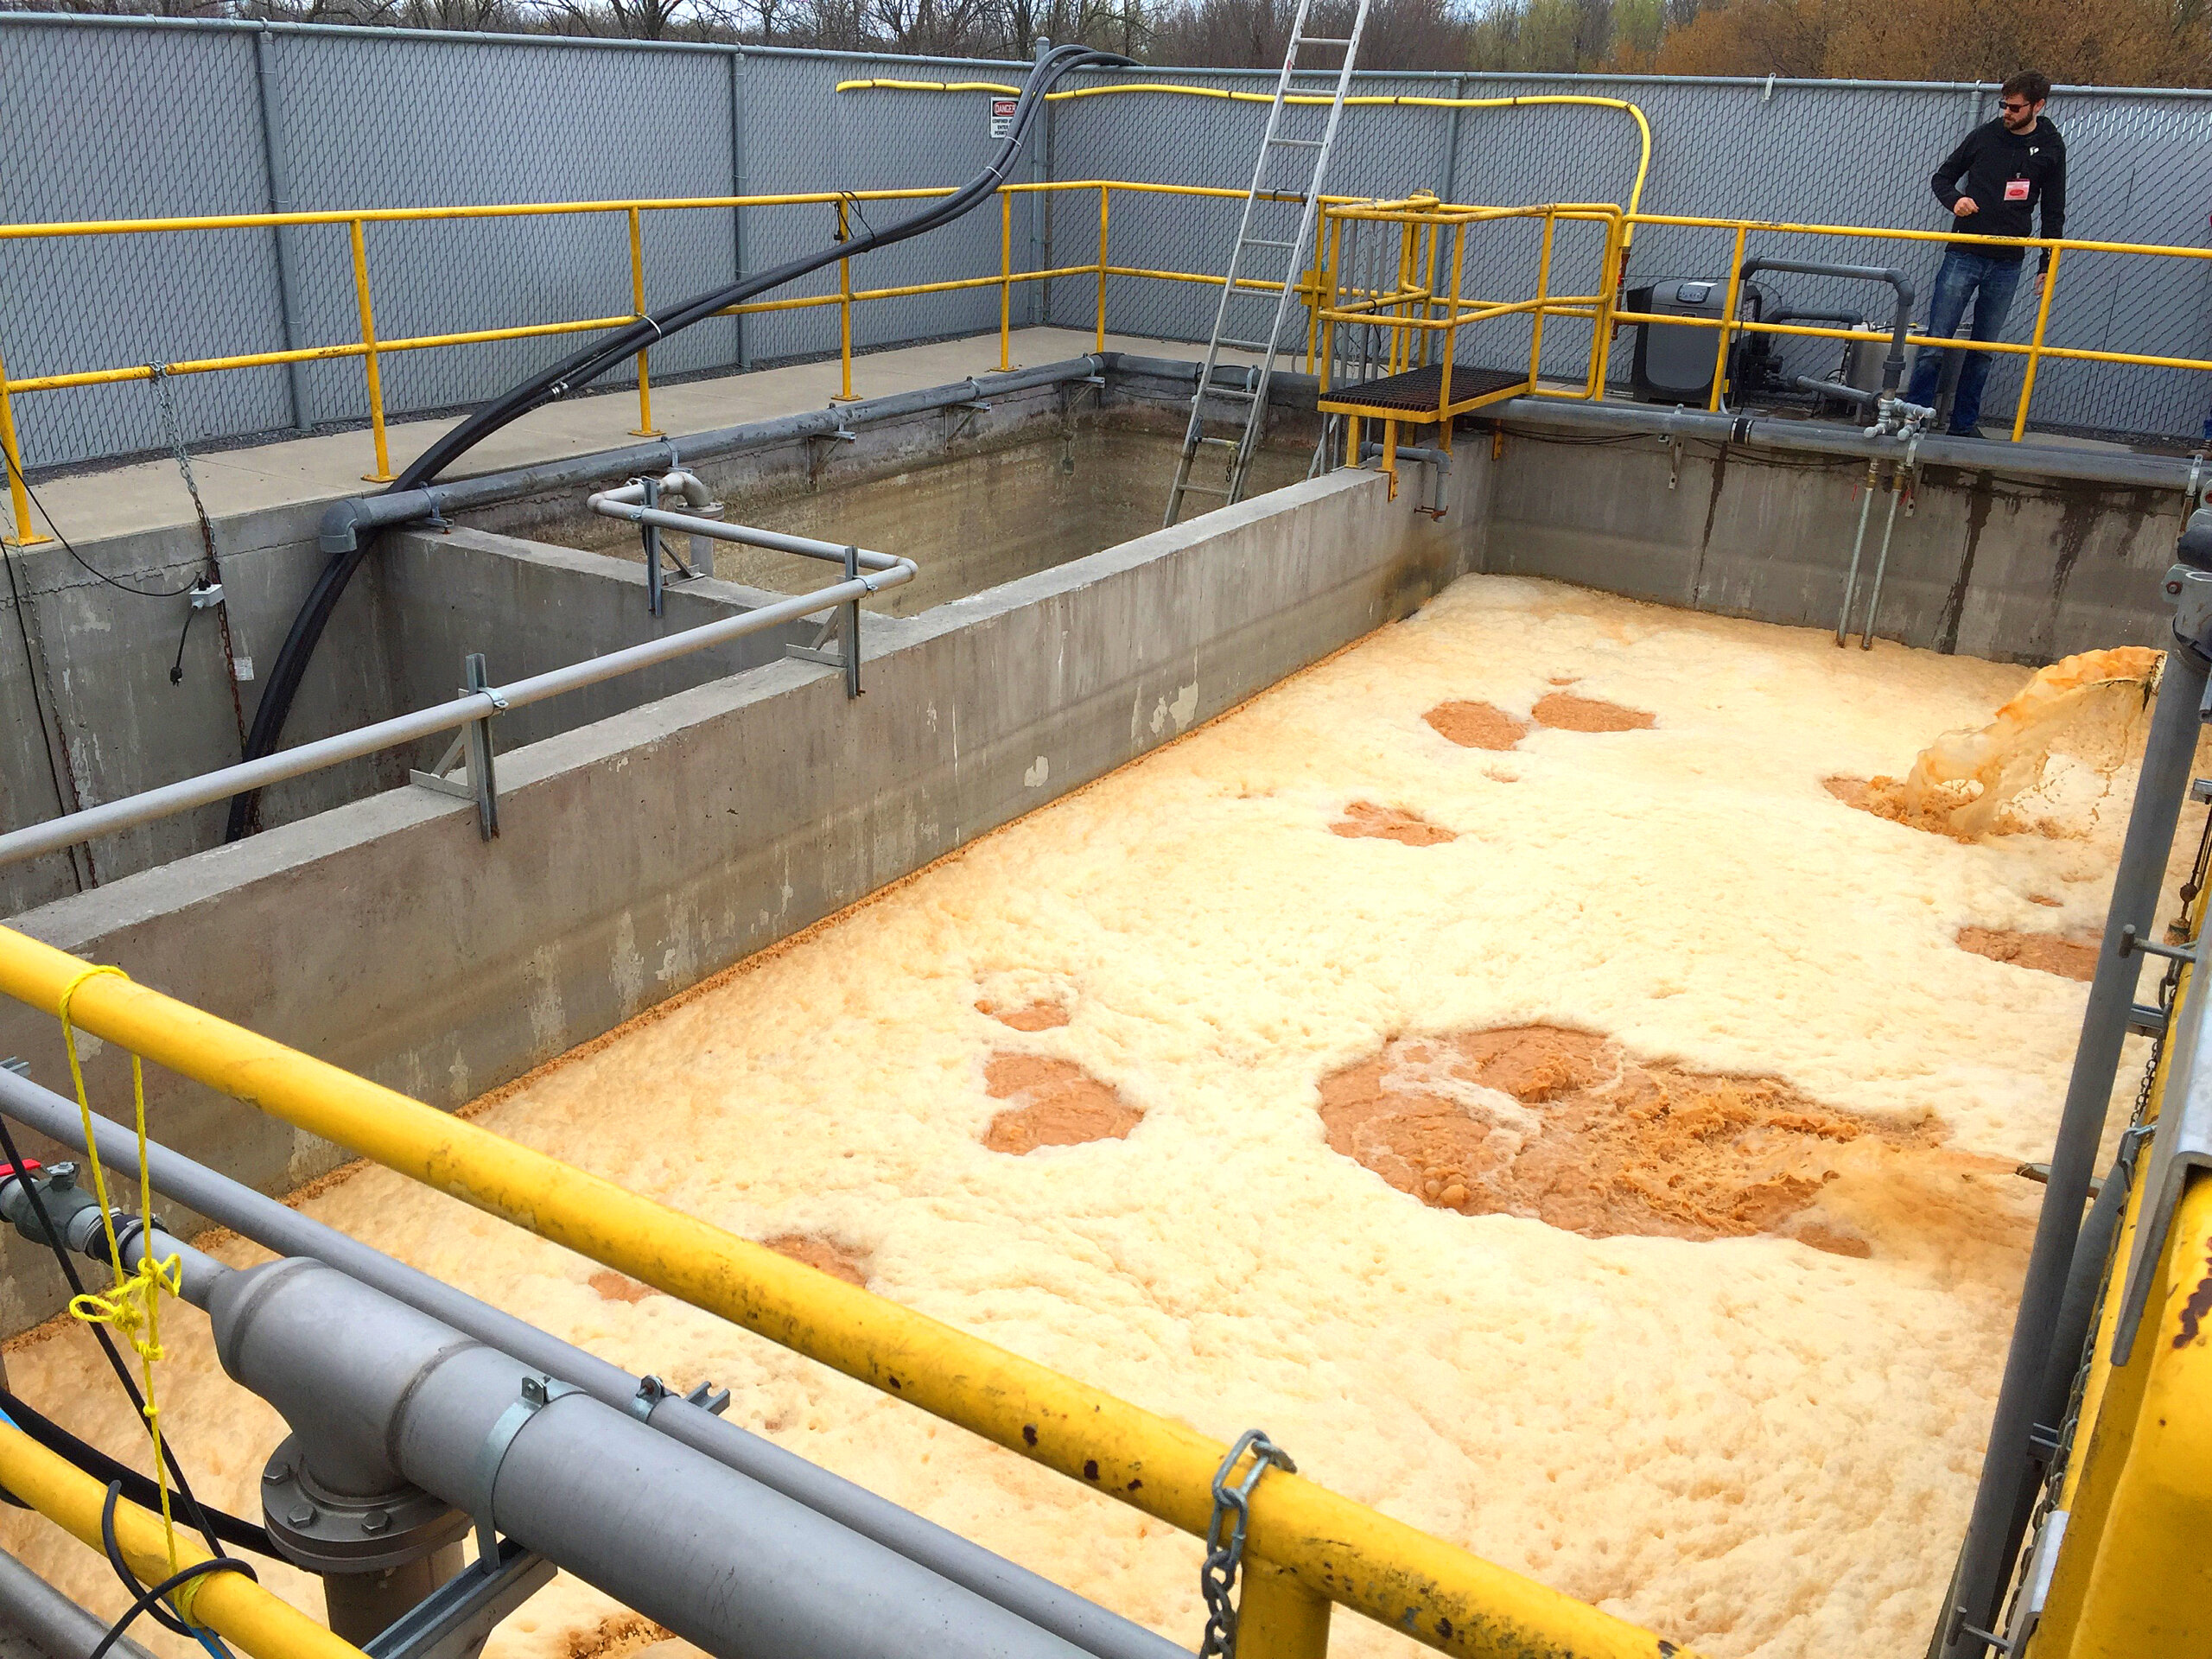 A wastewater engineer observes the wastewater treatment process of a large concrete tank with a series of divisions protected by a painted yellow steel guard rail, dirty water with tan and yellow foam enters the largest tank on the right through a pipe